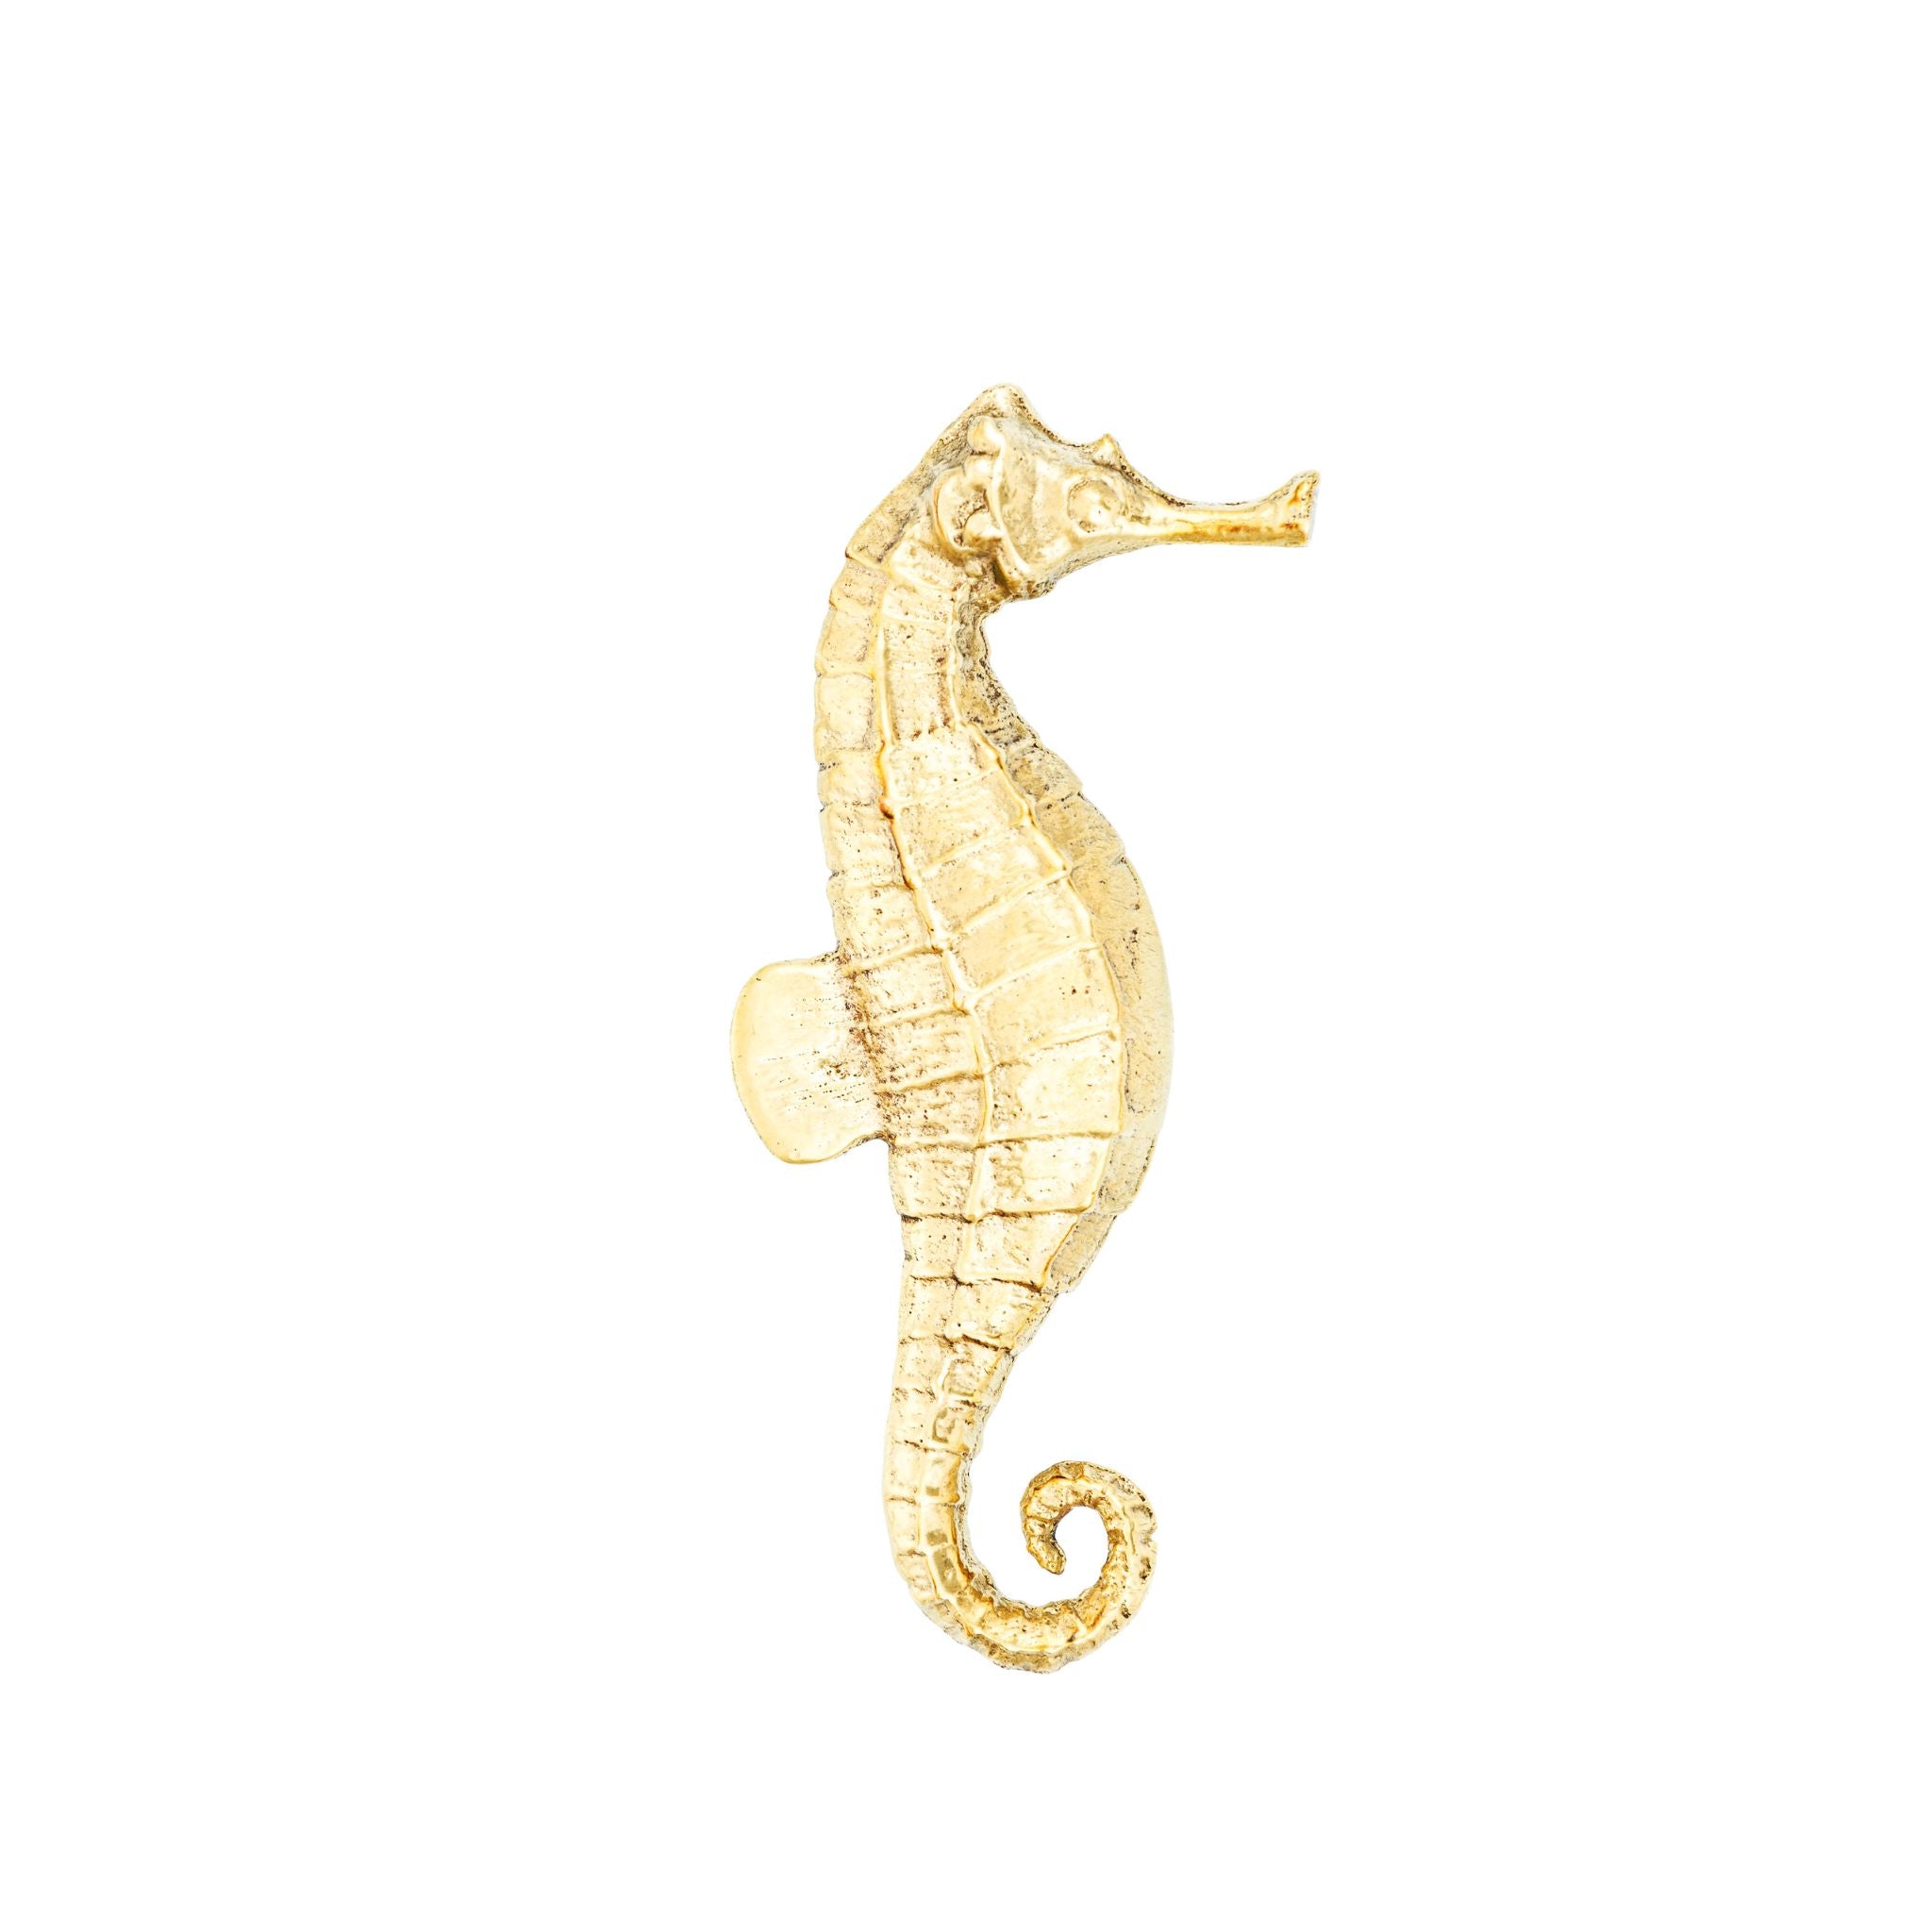 A detailed brass knob shaped like a seahorse, perfect for enhancing your decor with coastal charm.